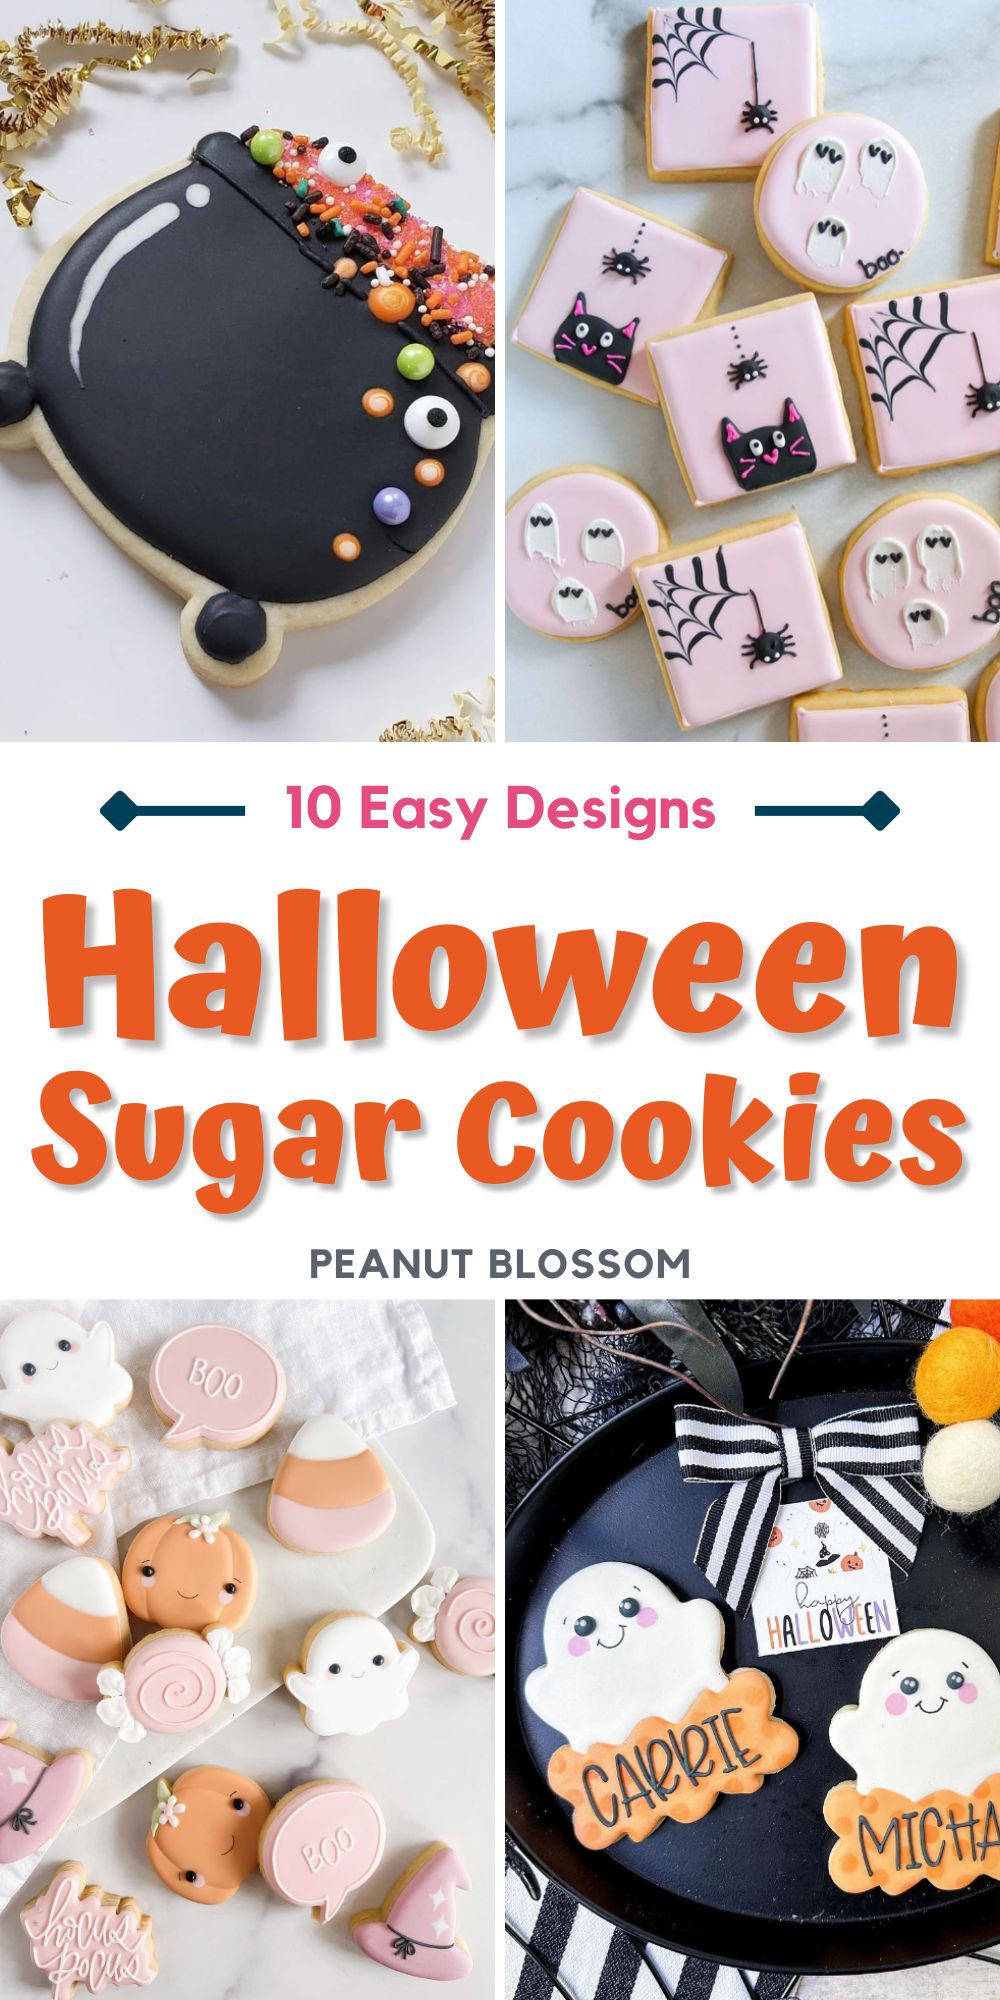 The photo collage shows 4 easy sugar cookie designs for Halloween.